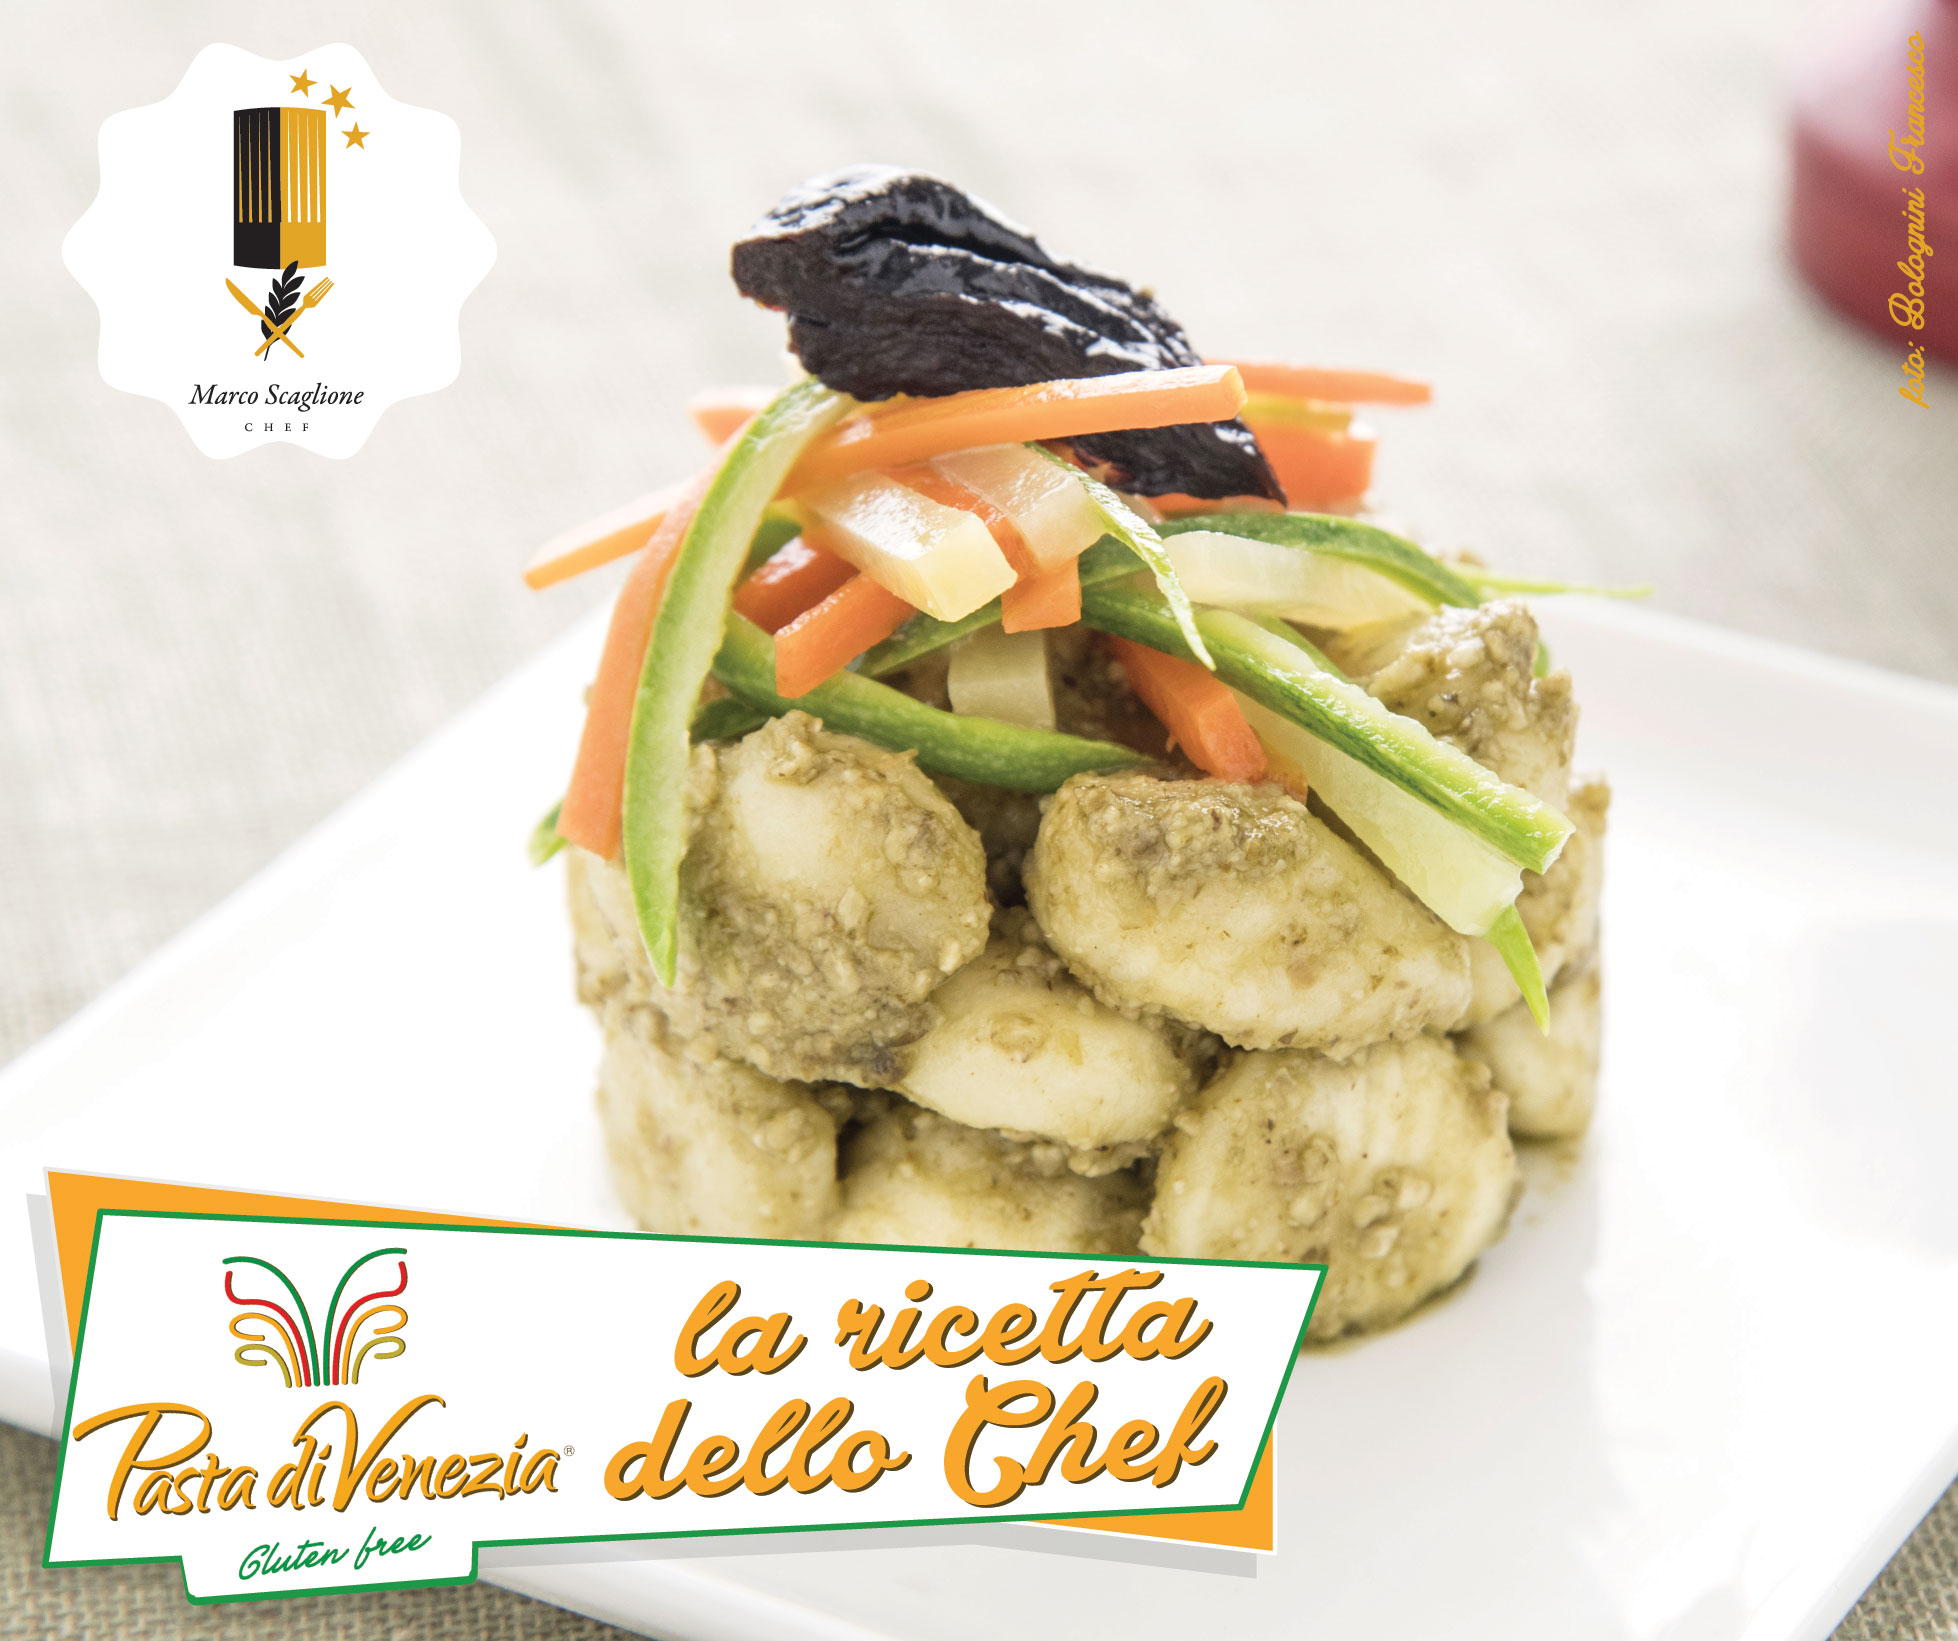 Gluten-free Gnocchi with Pesto Sauce With Crispy Vegetables And Prunes